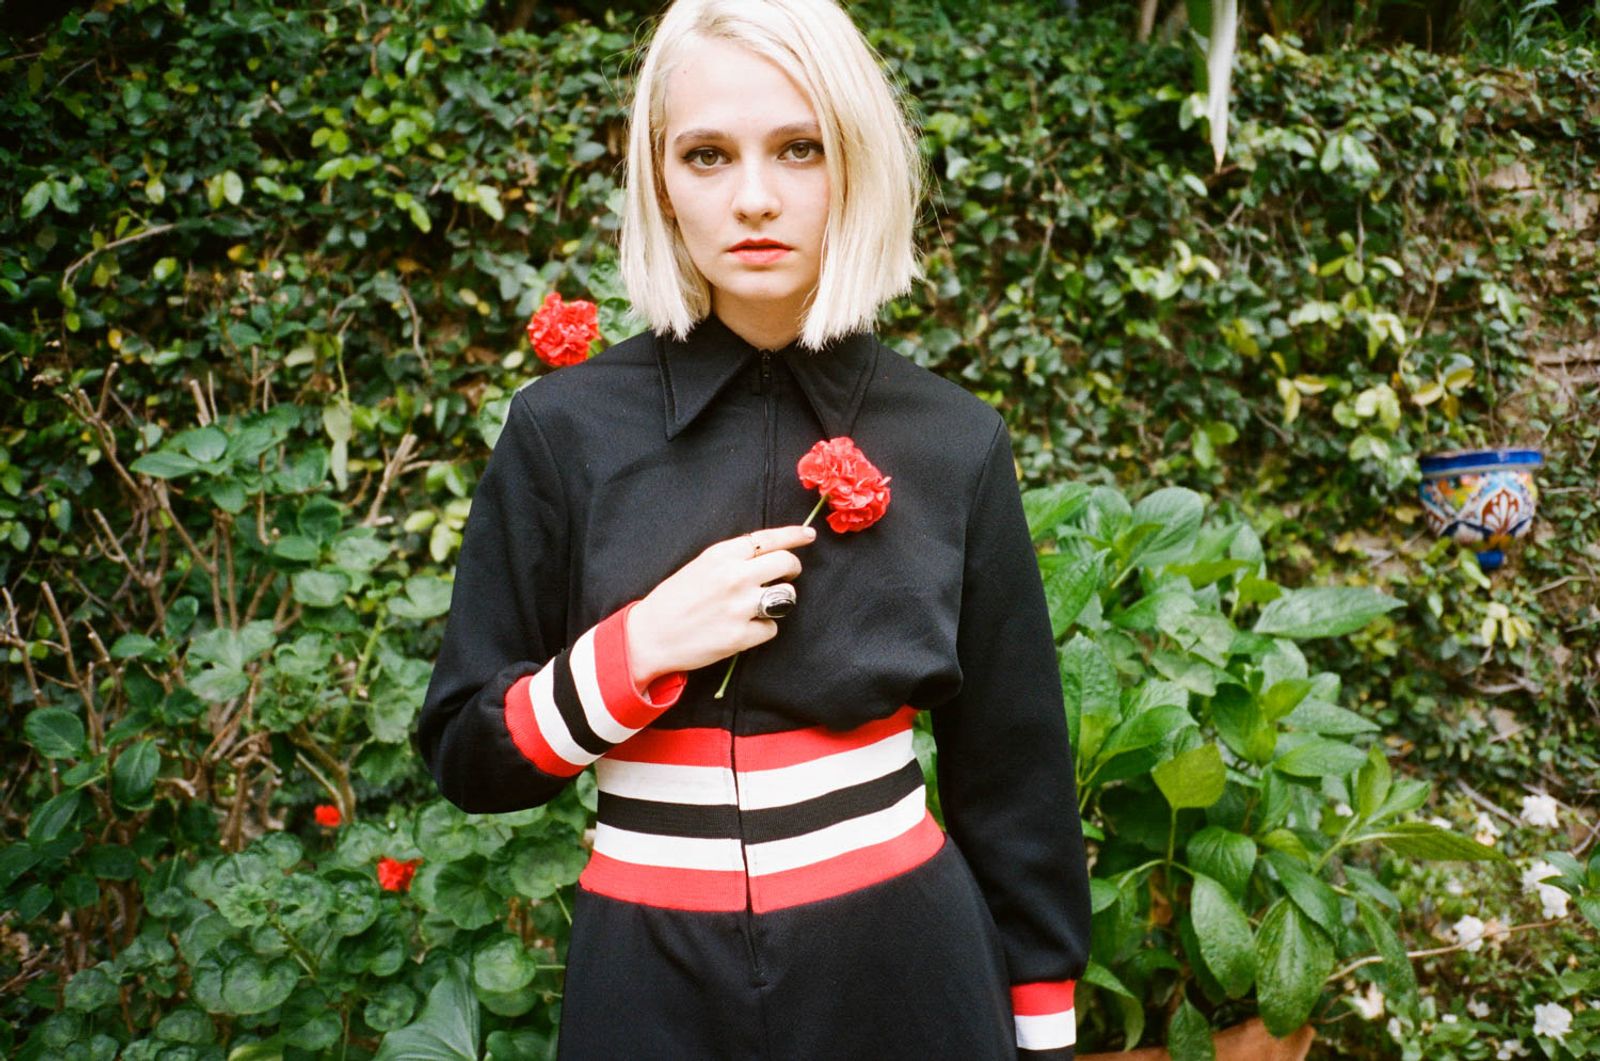 Clem From Cherry Glazer For DNA MAG!